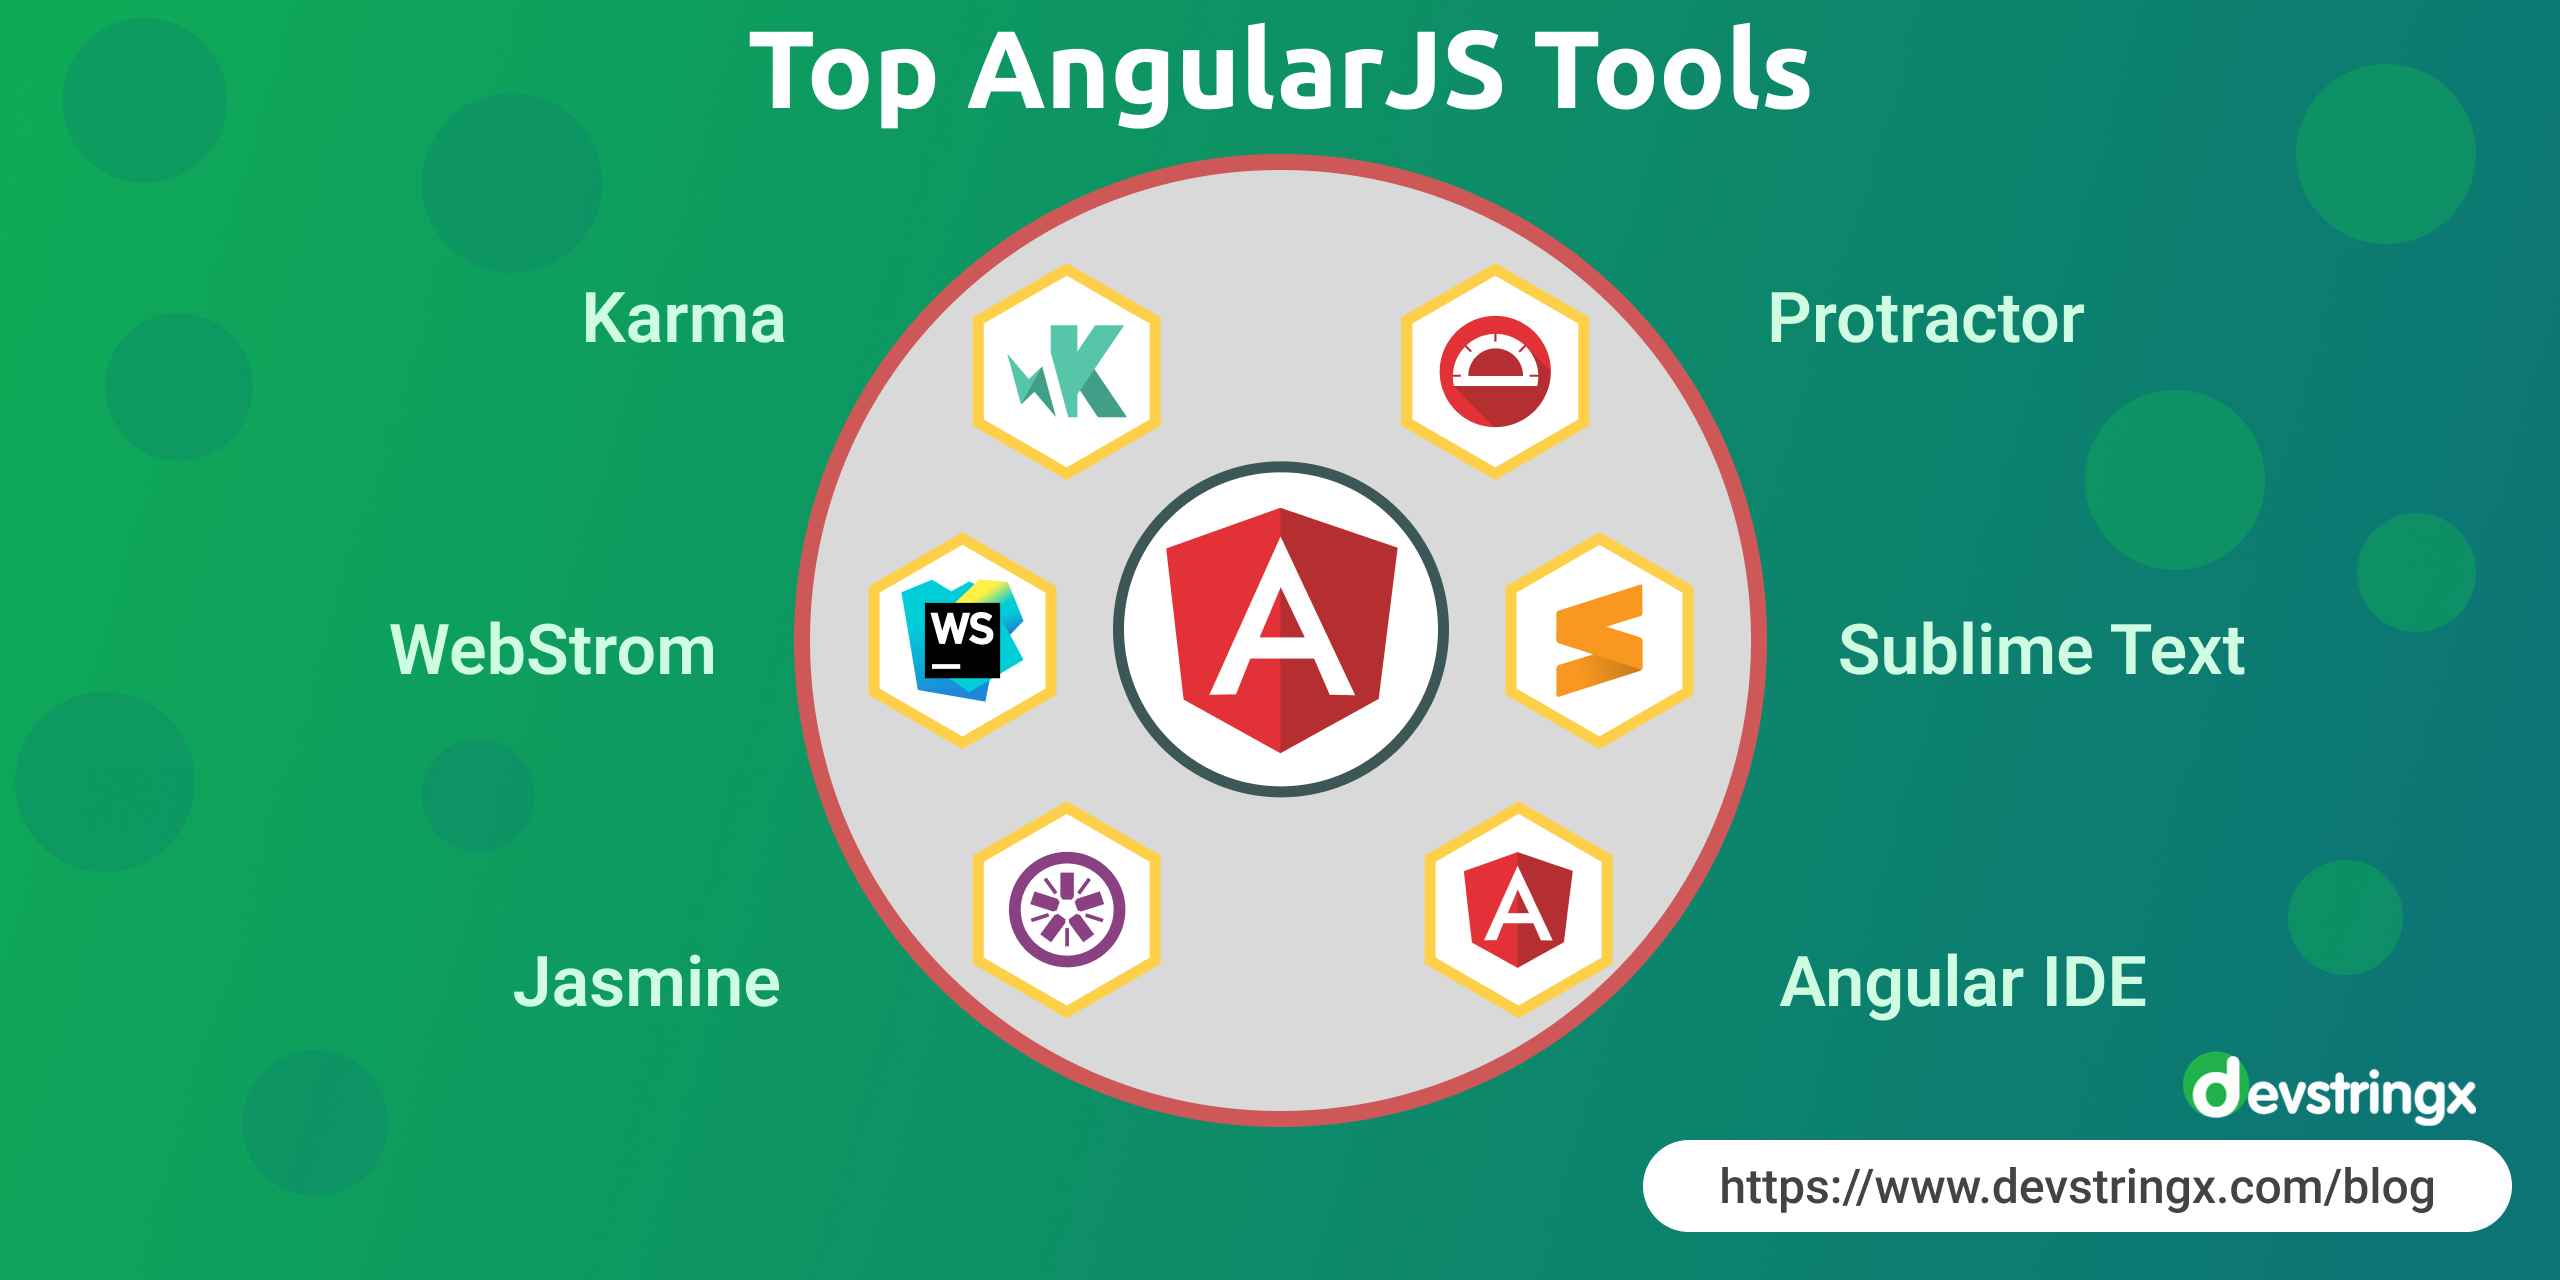 Feature image for Angular Js development tool